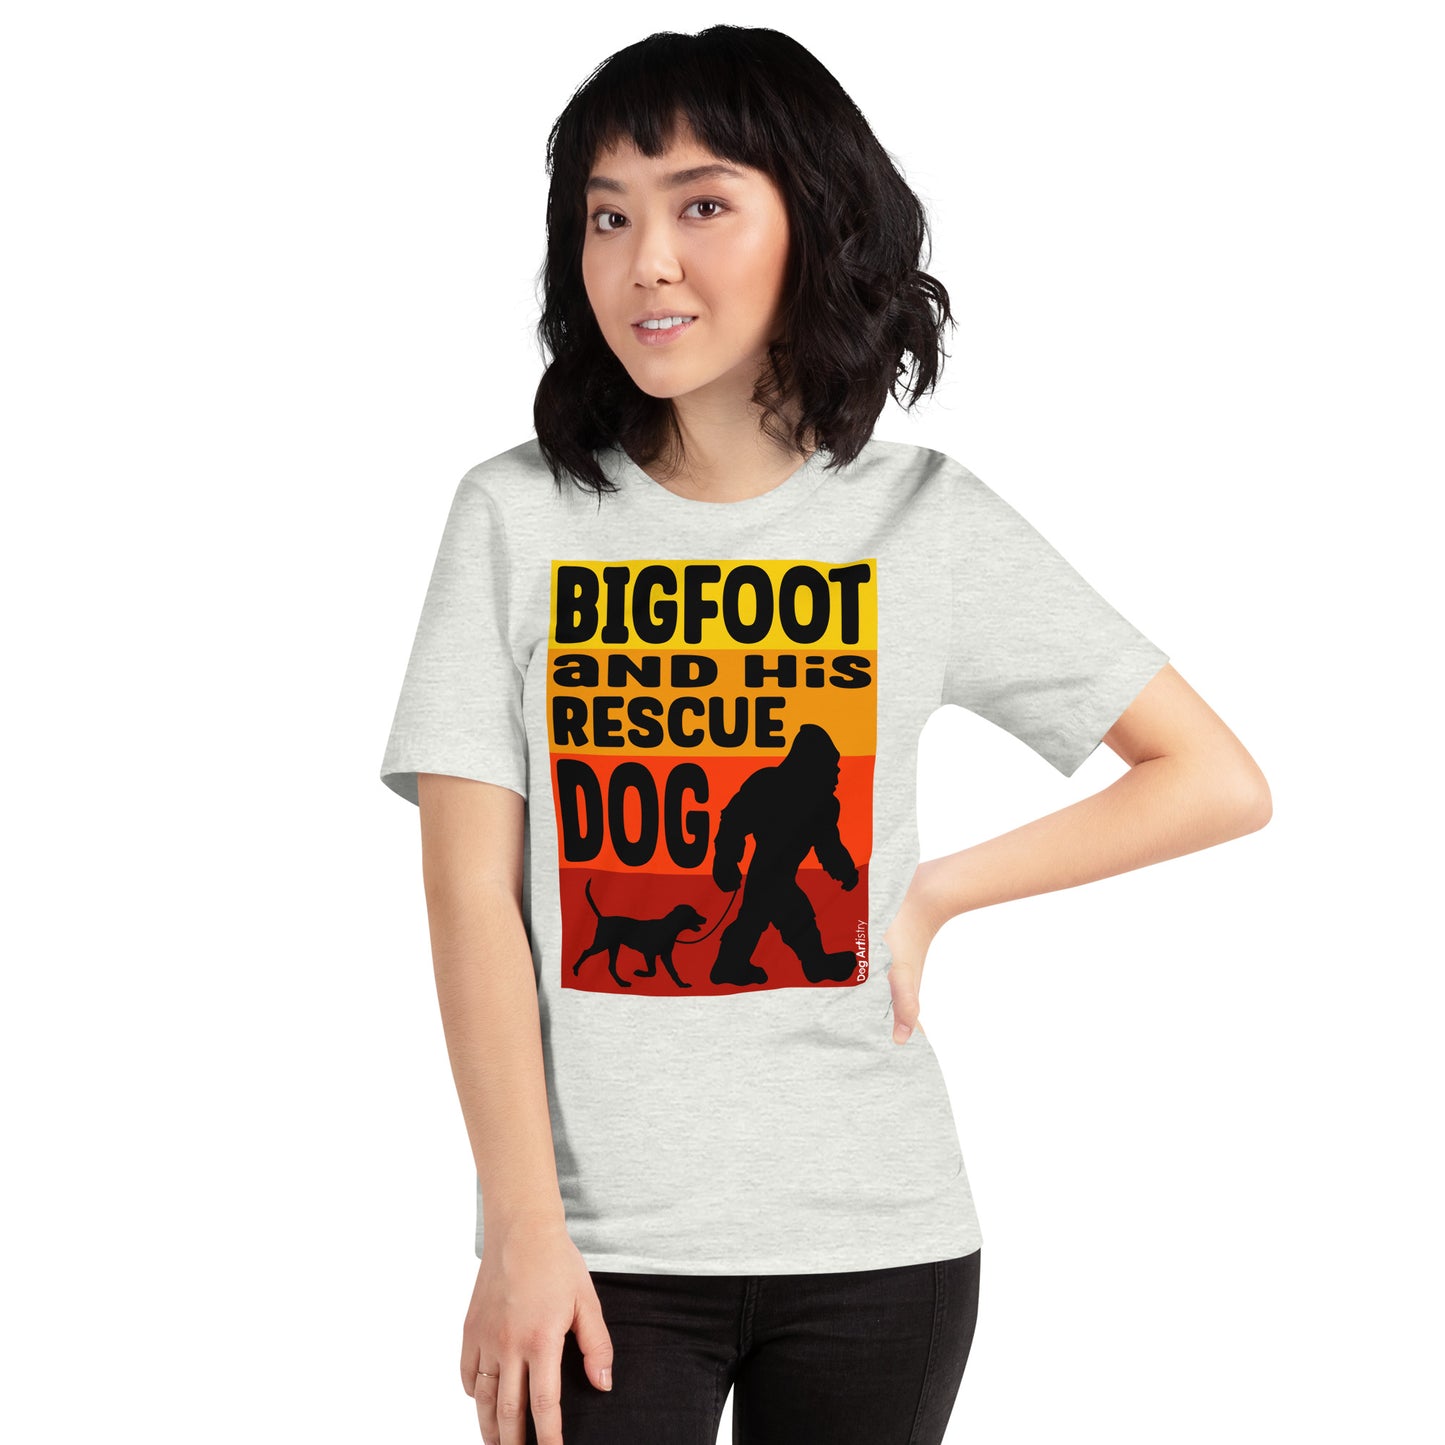 Bigfoot and his rescue dog unisex ash t-shirt by Dog Artistry.